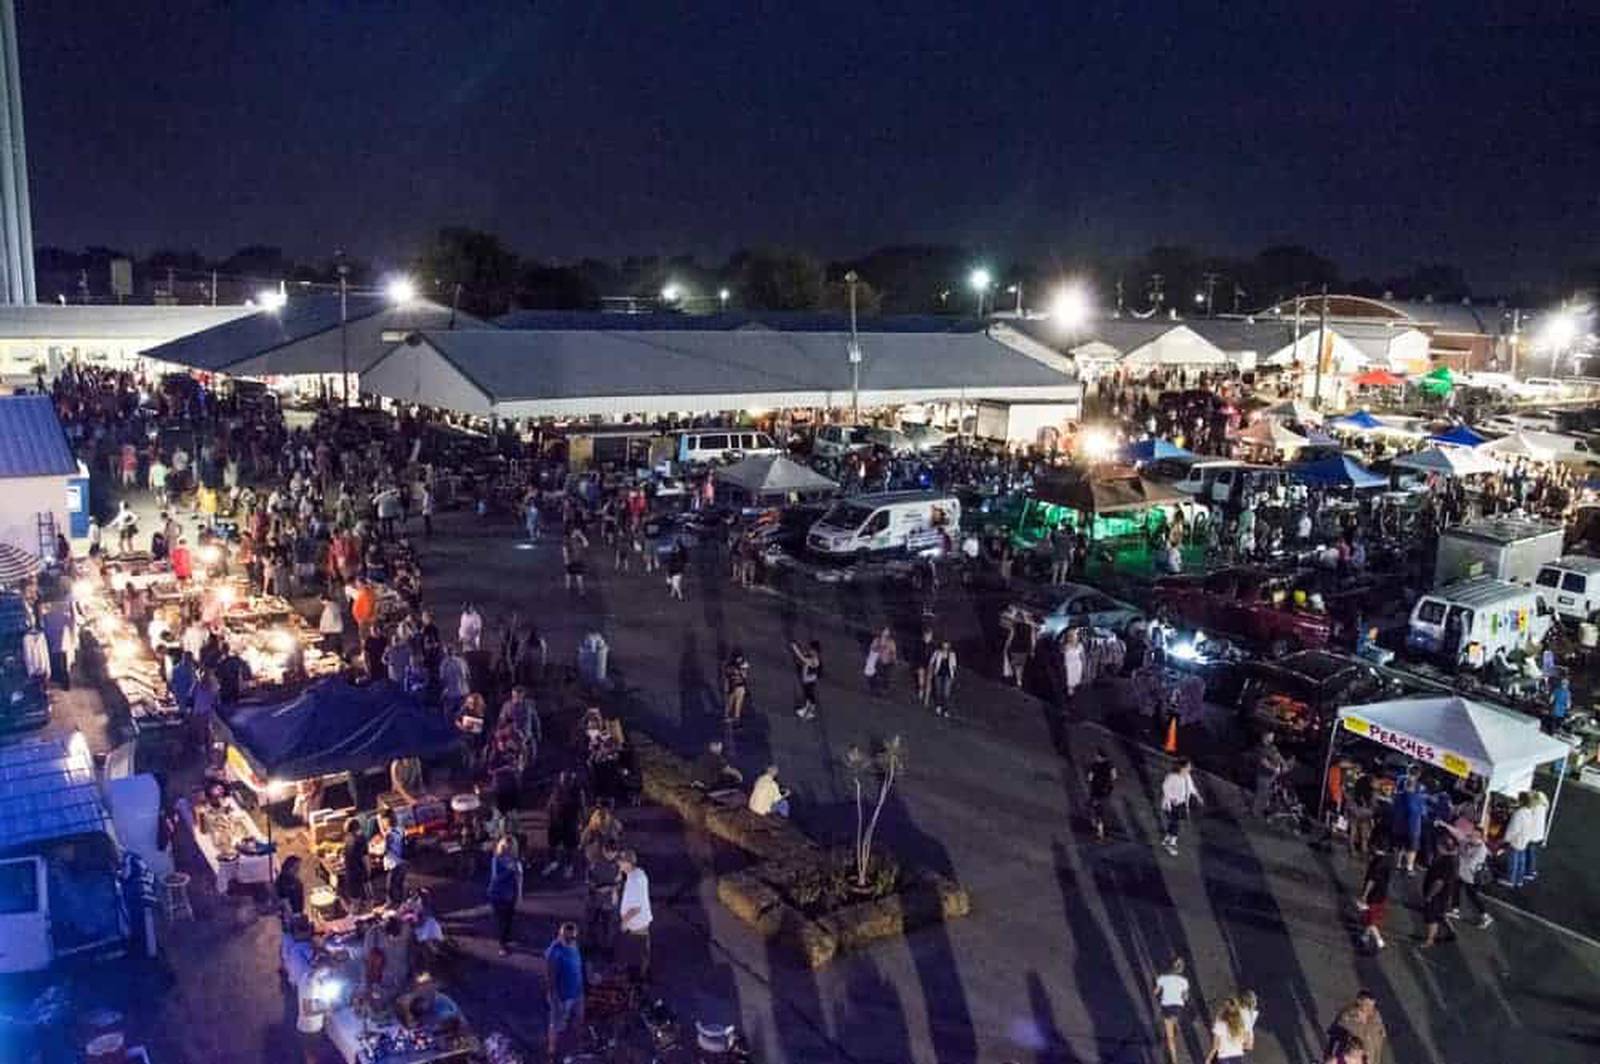 All Night Flea Market to return to Wheaton with celebrities Shaw Local